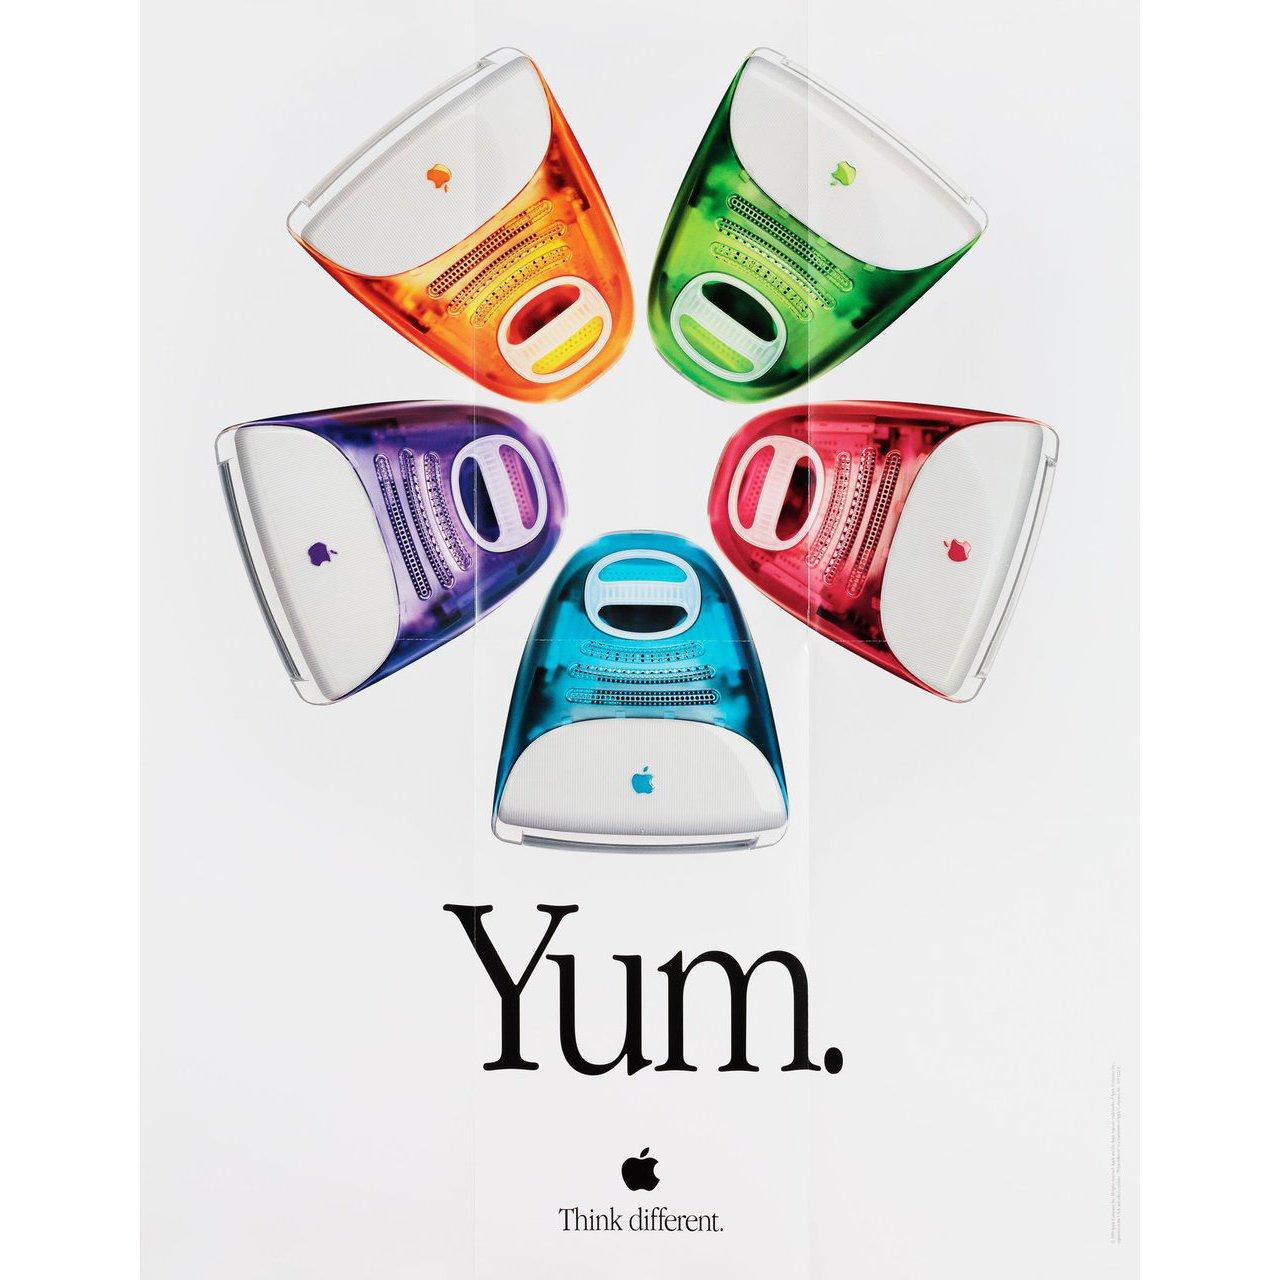 American Apple: Yum 1999 U.S. Poster For Sale